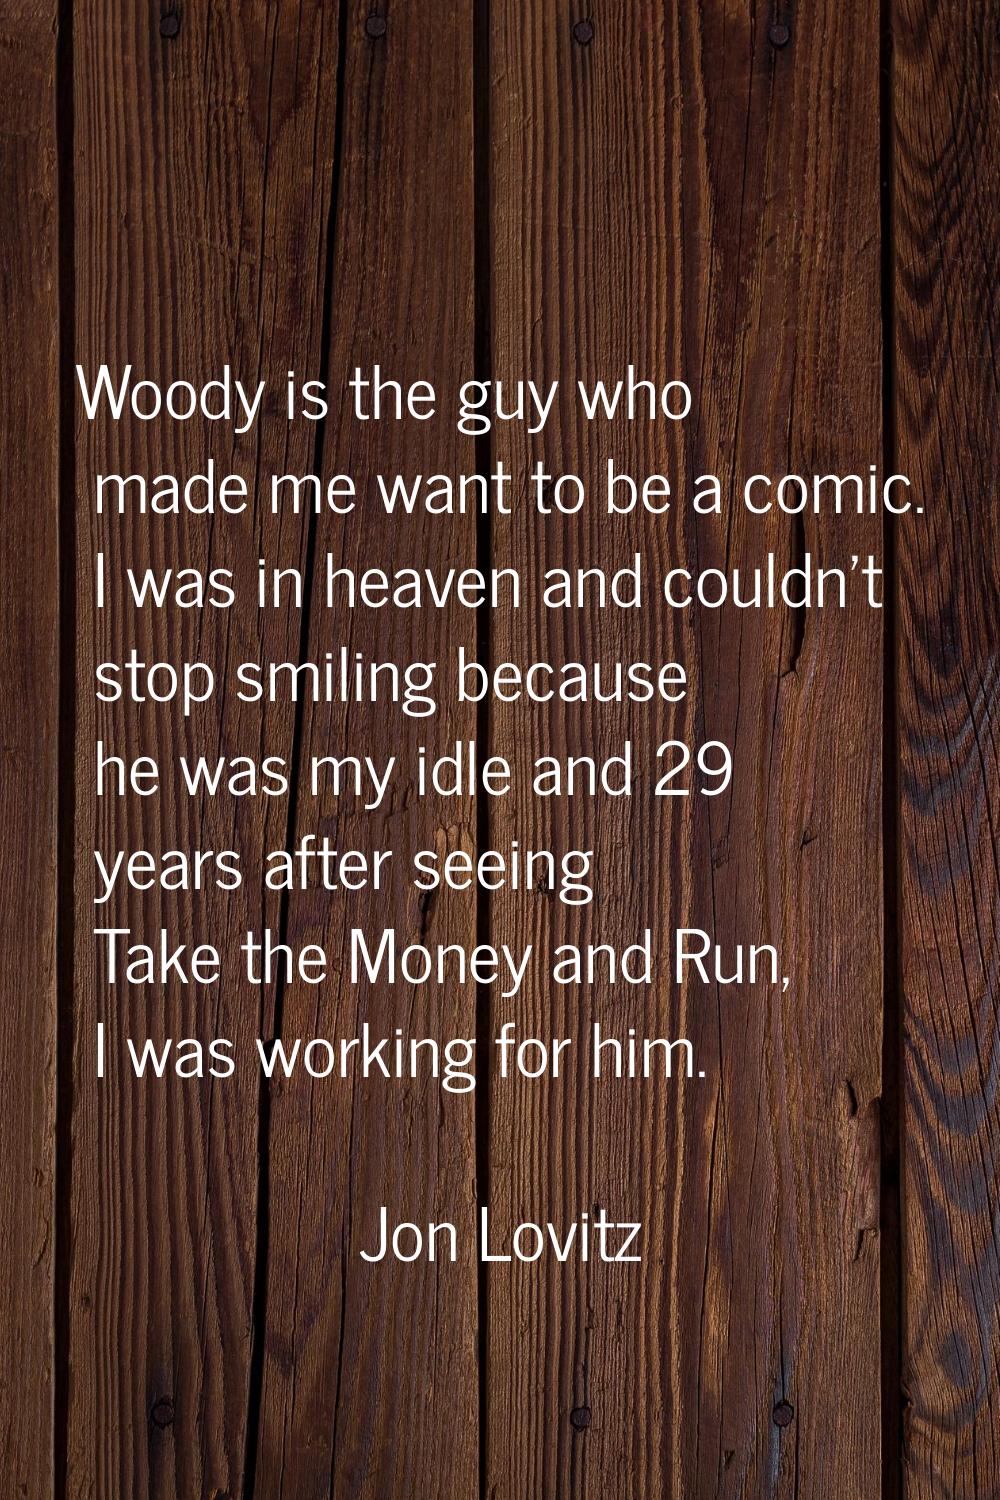 Woody is the guy who made me want to be a comic. I was in heaven and couldn't stop smiling because 